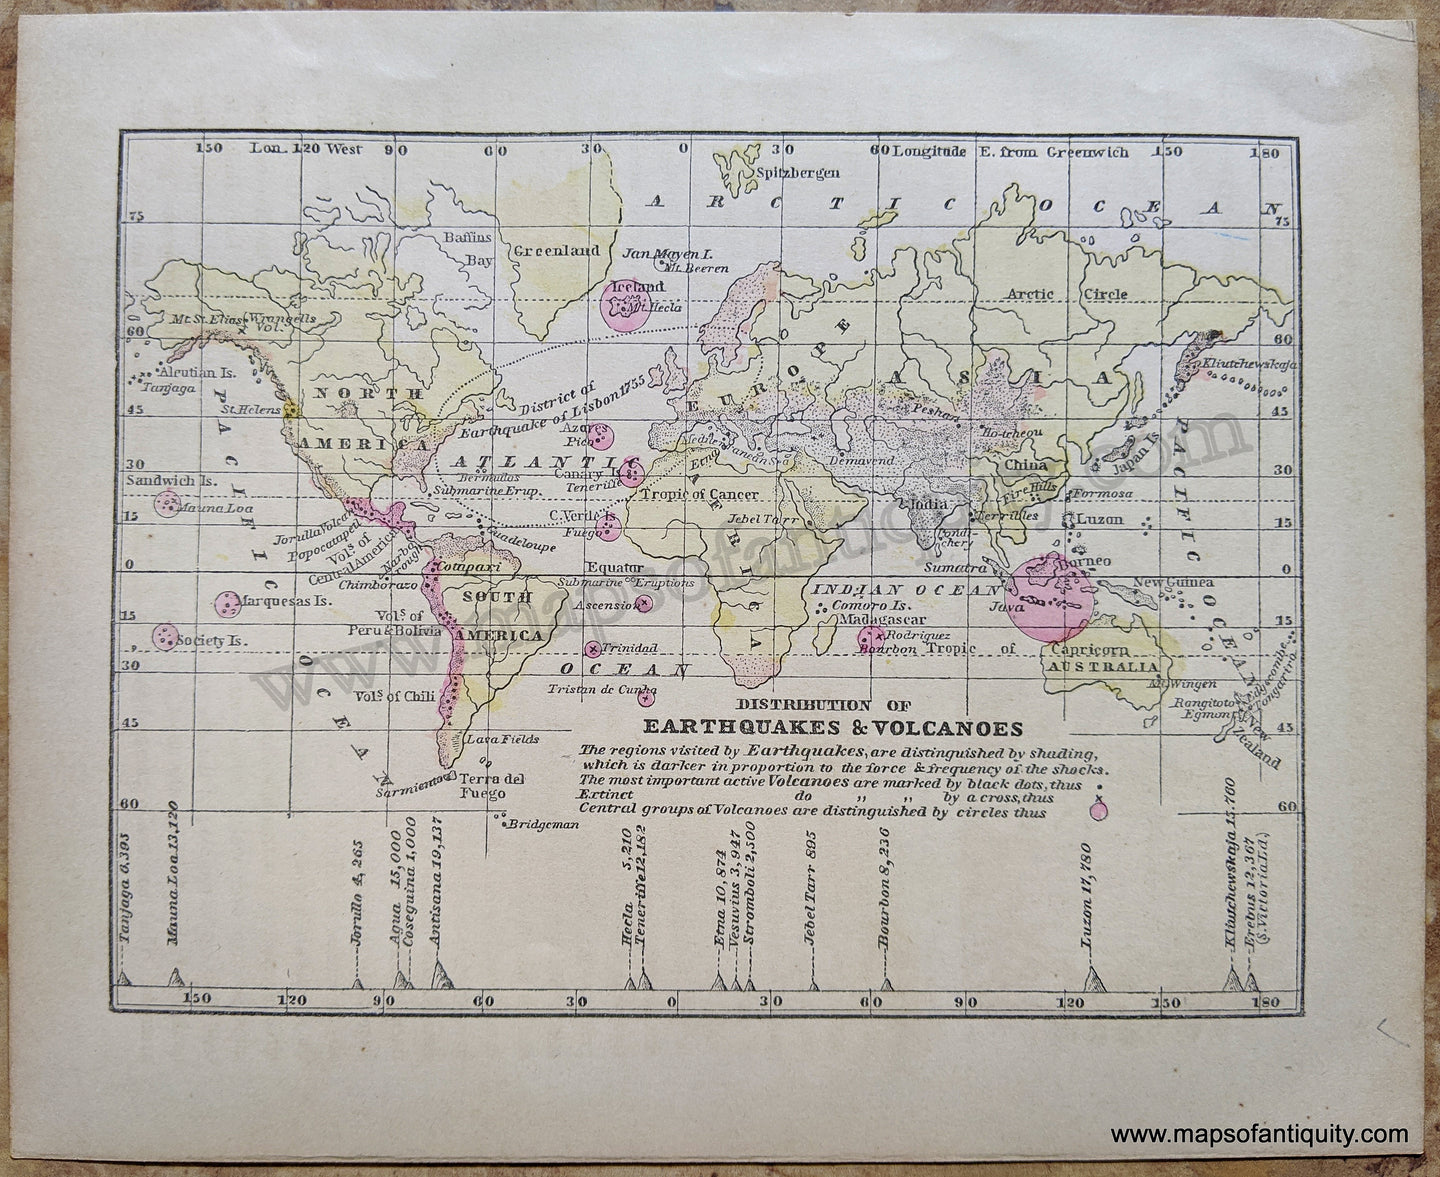 Antique-Hand-Colored-Map-Distribution-of-Earthquakes-&-Volcanoes-World--1857-Morse-and-Gaston-Maps-Of-Antiquity-1800s-19th-century